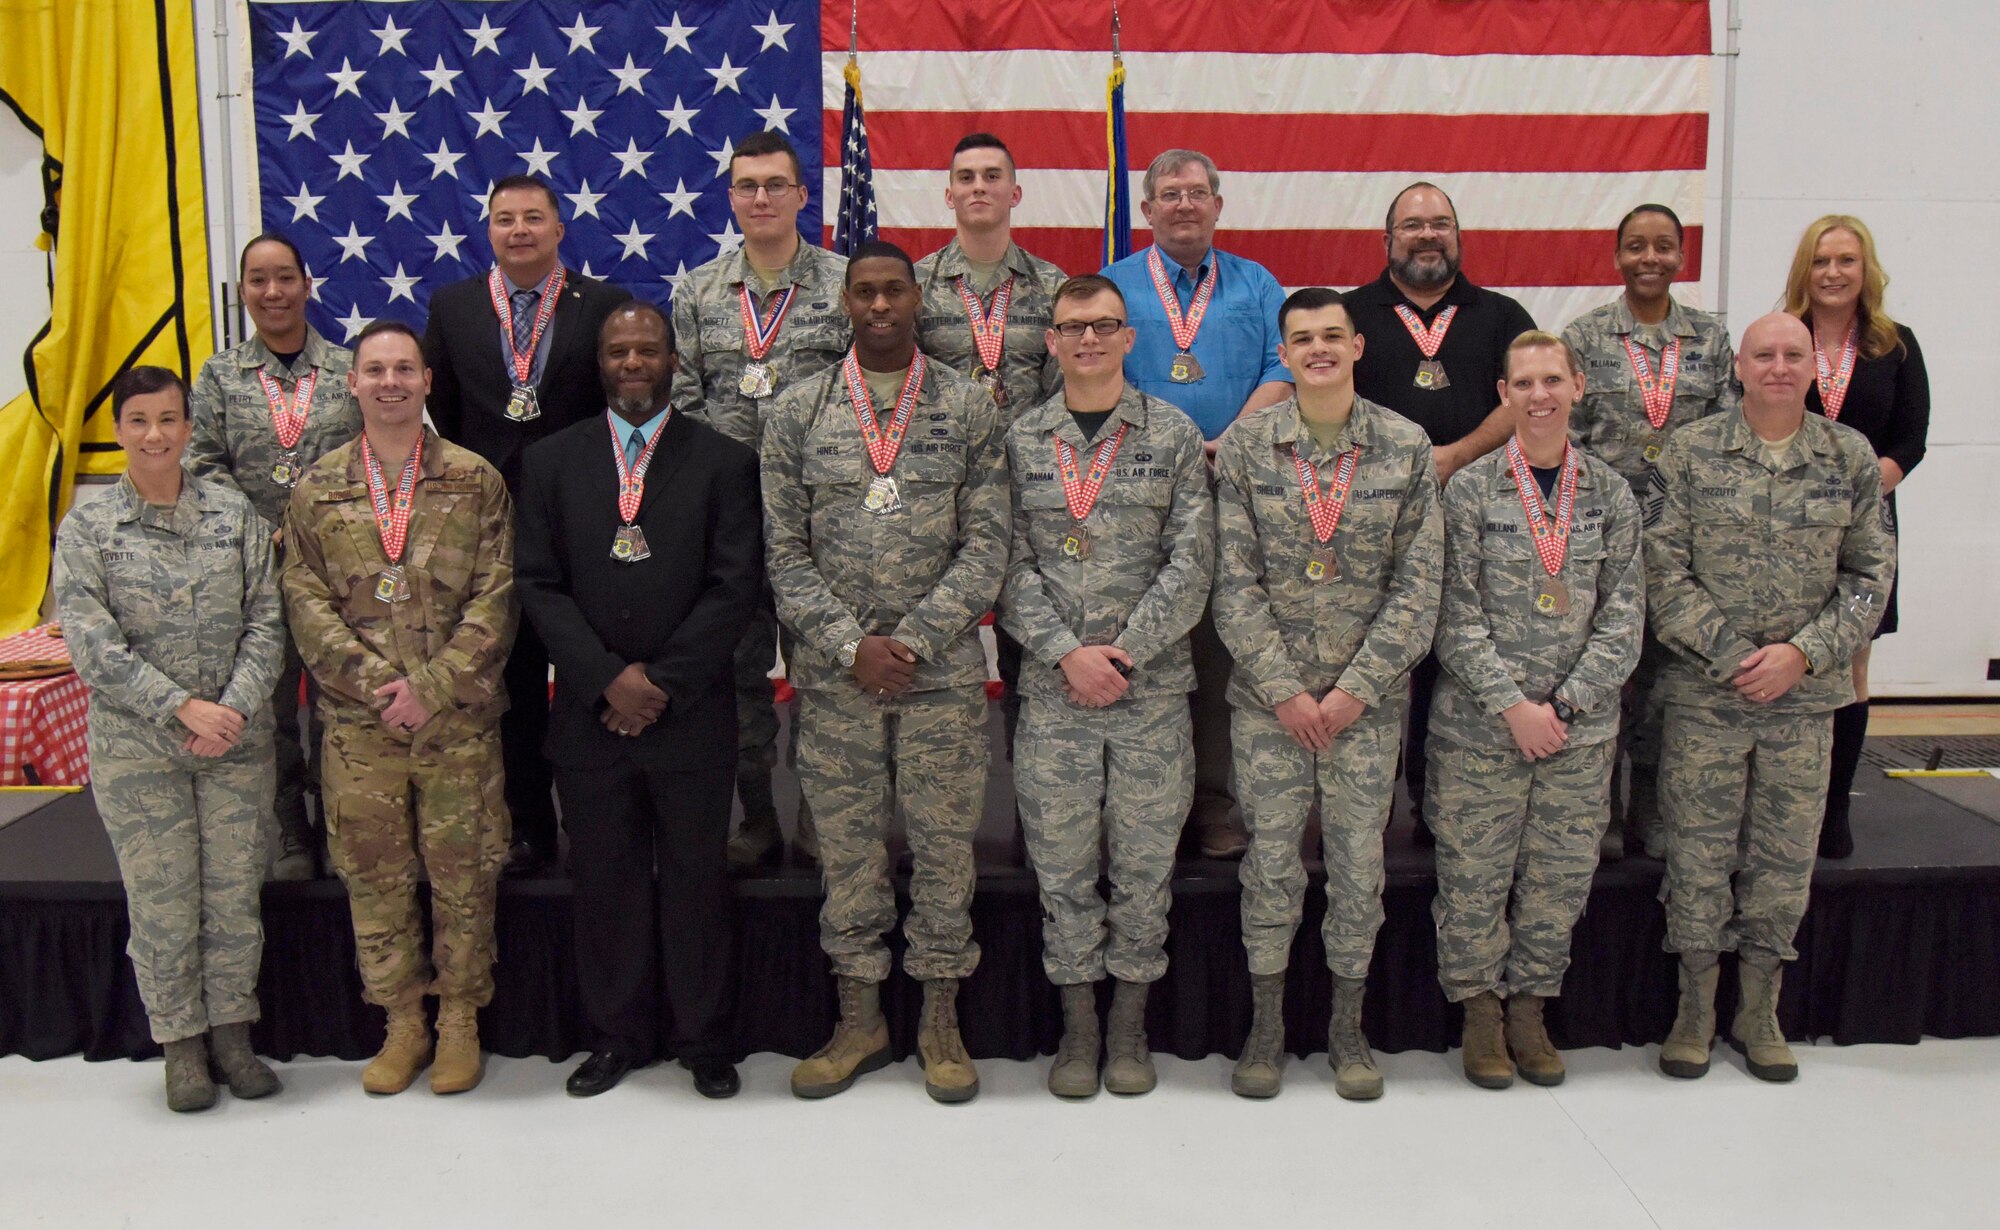 Winners of the 81st Training Wing's 2018 Annual Awards Ceremony pose for a photo during a ceremony at Keesler Air Force Base, Mississippi, Feb. 1, 2019. During the ceremony, base leadership recognized outstanding Airmen and civilians from across the installation for their accomplishments throughout 2018. (U.S. Air Force photo by Kemberly Groue)